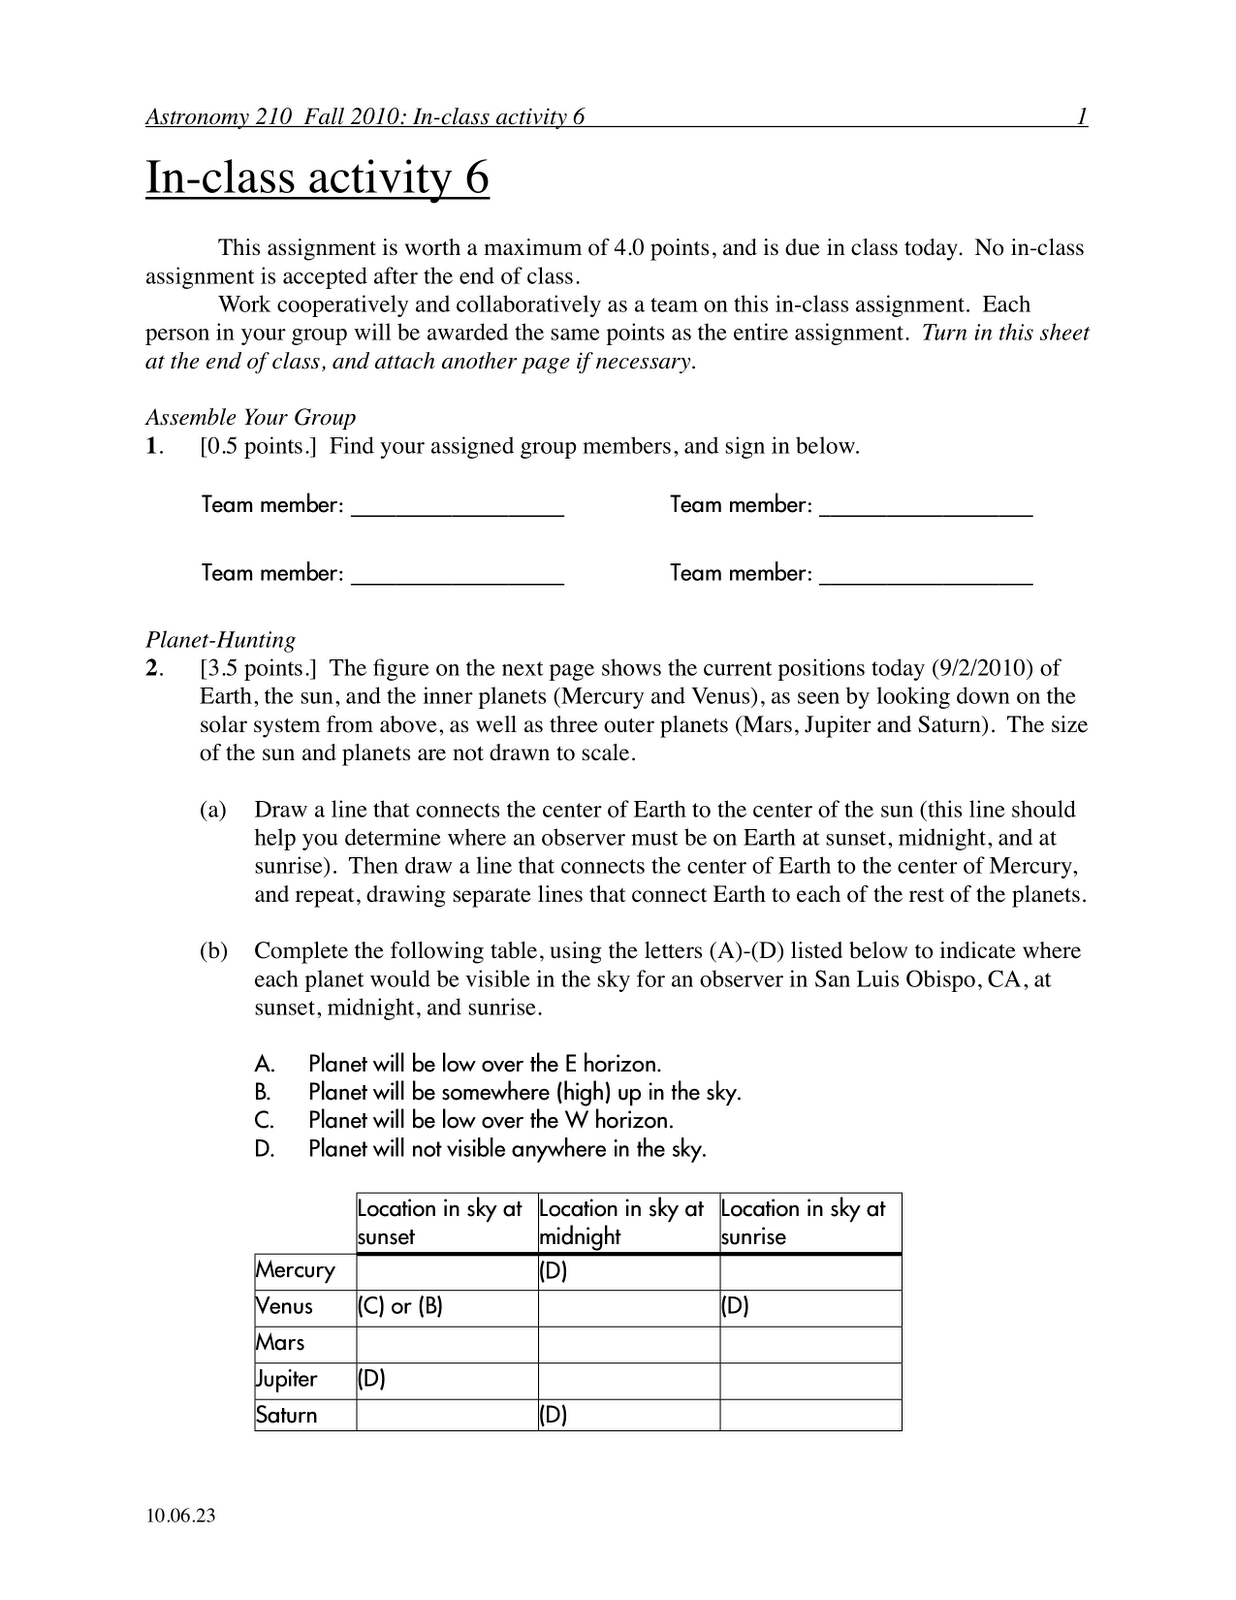 Theory Law Worksheet Middle School Image